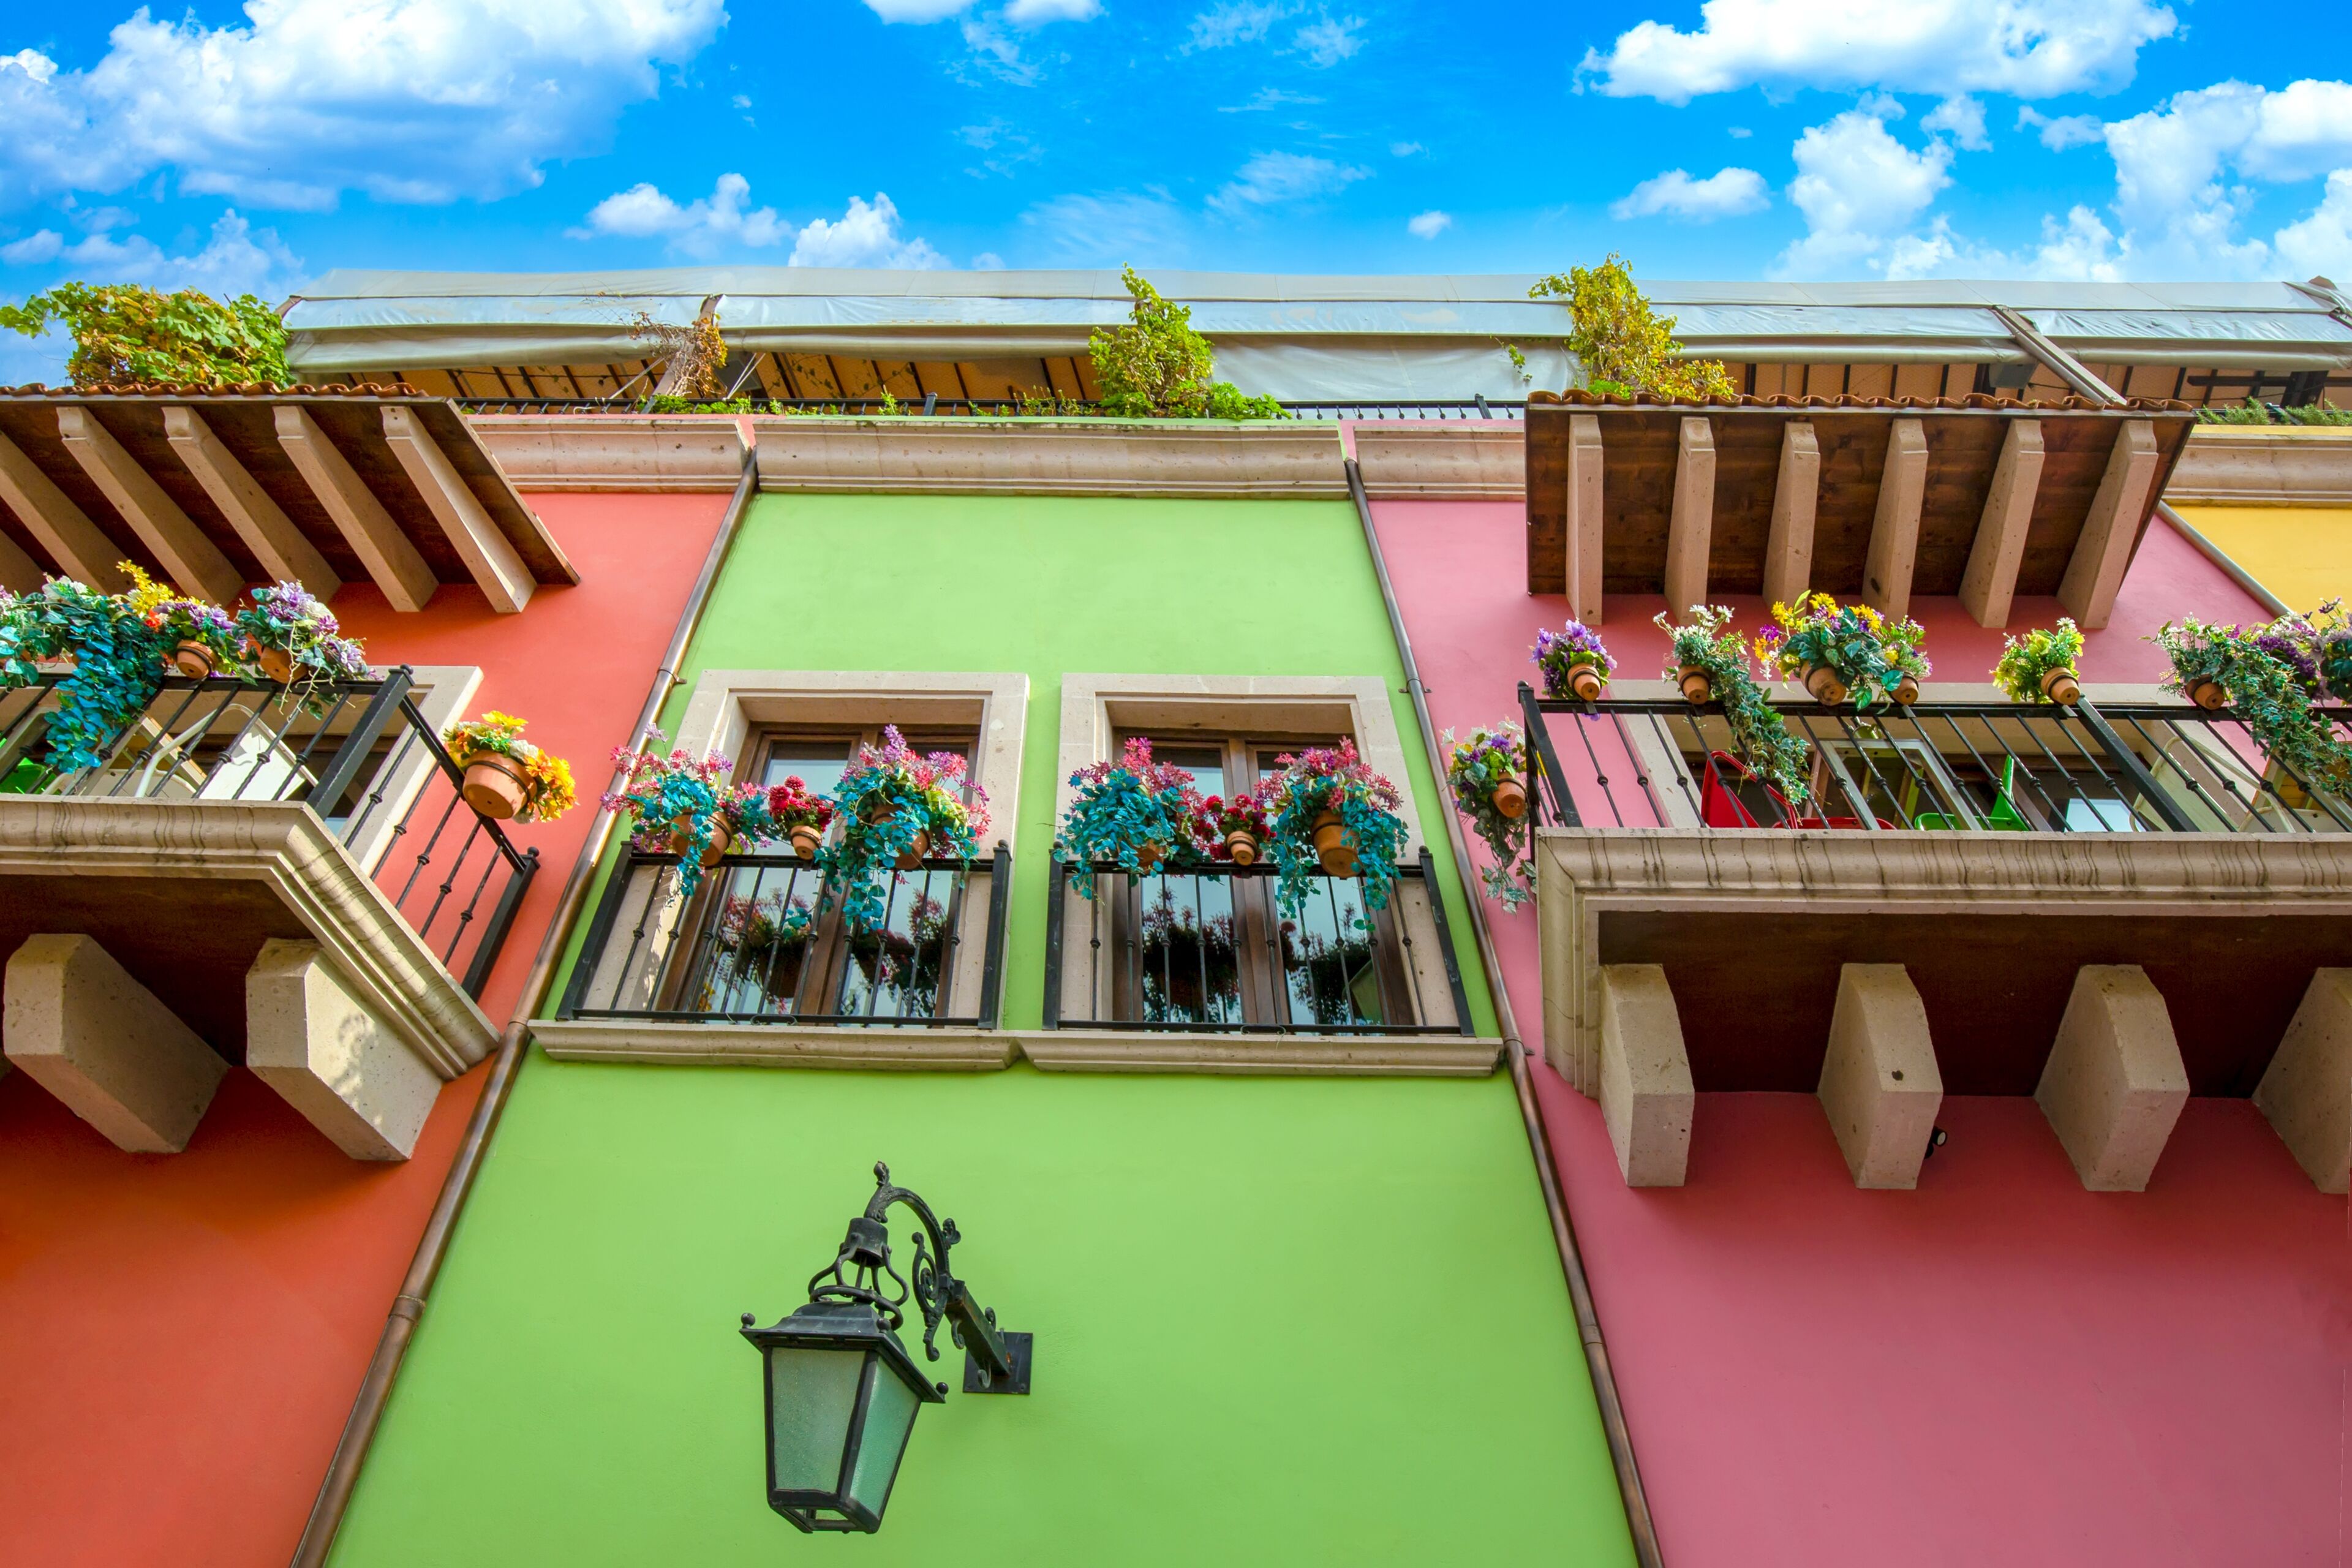 Mexico, Monterrey, colorful historic houses in Barrio Antiguo, a famous tourist attraction.